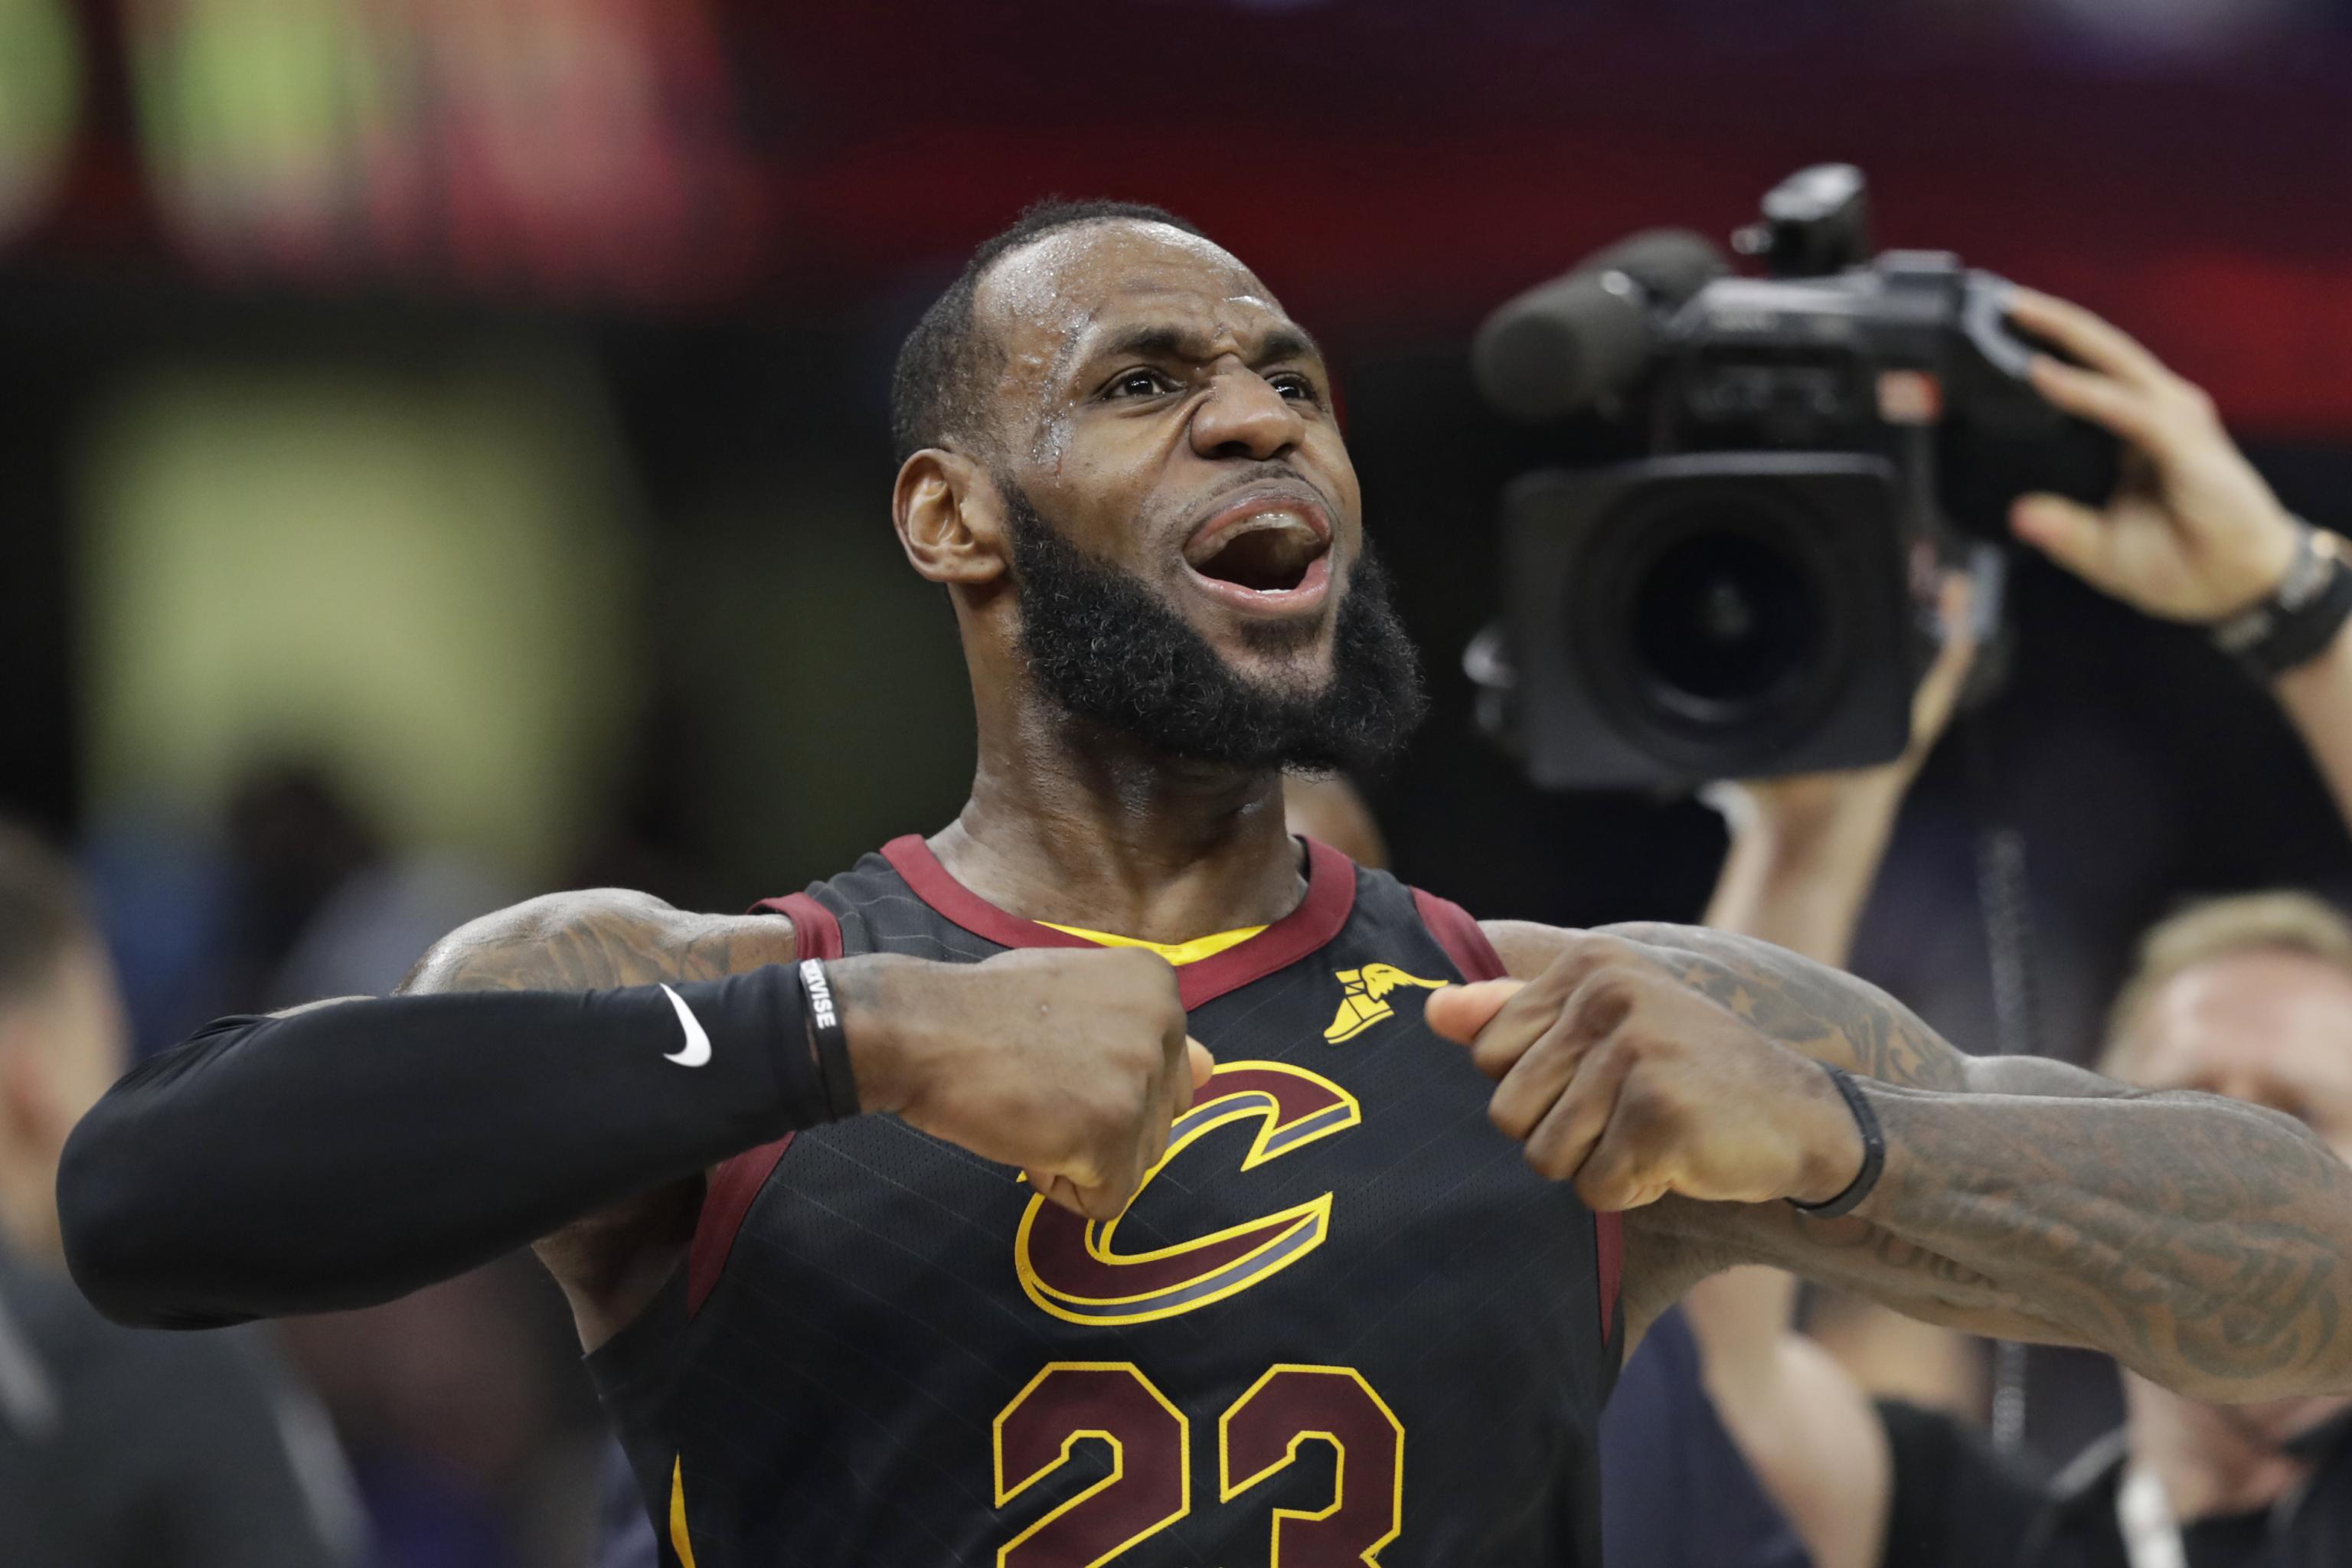 Lebron James Buzzer Beater Powers Cavaliers Past Pacers In Game 5 Win Bleacher Report Latest News Videos And Highlights